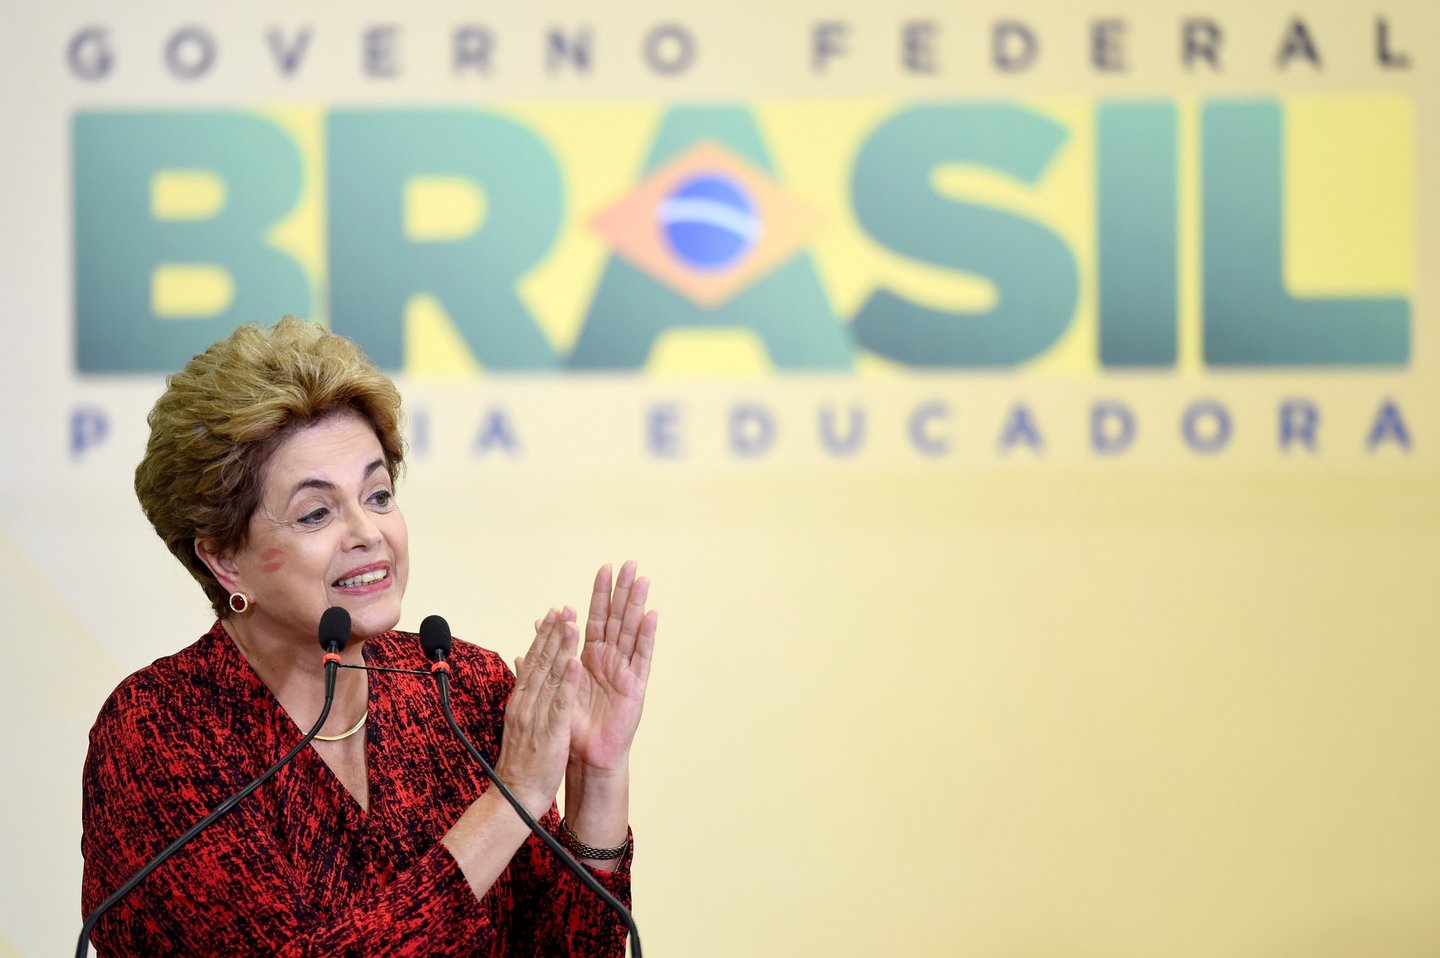 TOPSHOT - Brazilian President Dilma Rousseff during a ceremony to announce the creation of new public universities, at Planalto Palace in Brasilia, on May 9, 2016. The impeachment of Brazilian President Dilma Rousseff was thrown into confusion when Waldir Maranhao, the interim speaker of the lower house of Congress annulled on May 9, 2016 an April vote by lawmakers to launch the process. He wrote in an order that a new vote should take place on whether to impeach Rousseff. / AFP / EVARISTO SA (Photo credit should read EVARISTO SA/AFP/Getty Images)